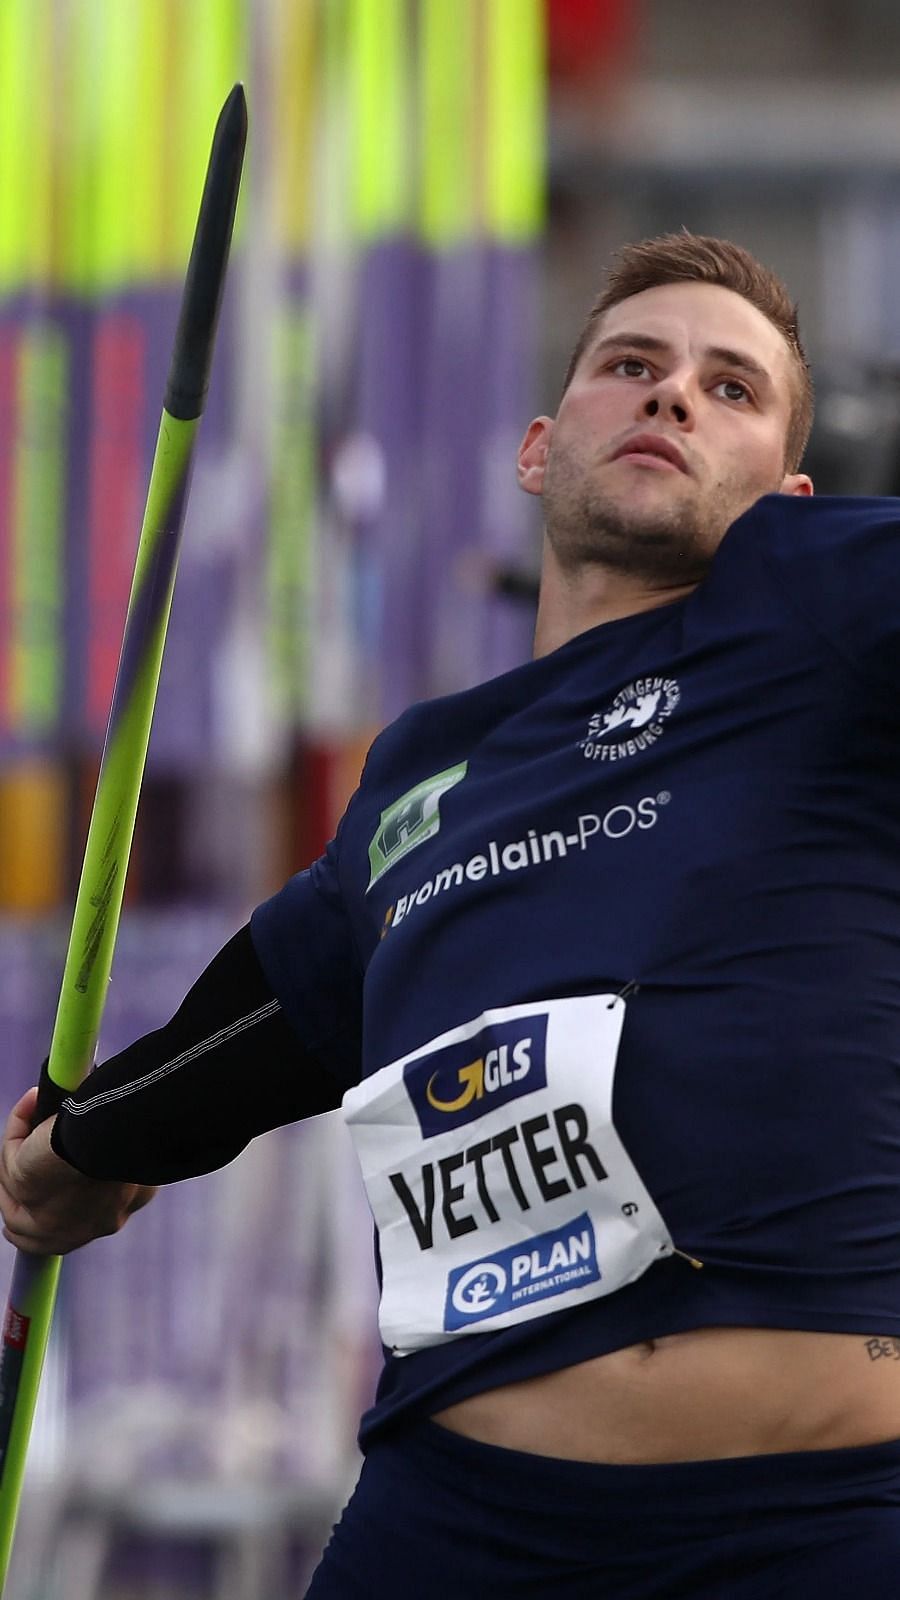 Javelin Throw Olympic Record - The Javelin Record Was Broken By ...